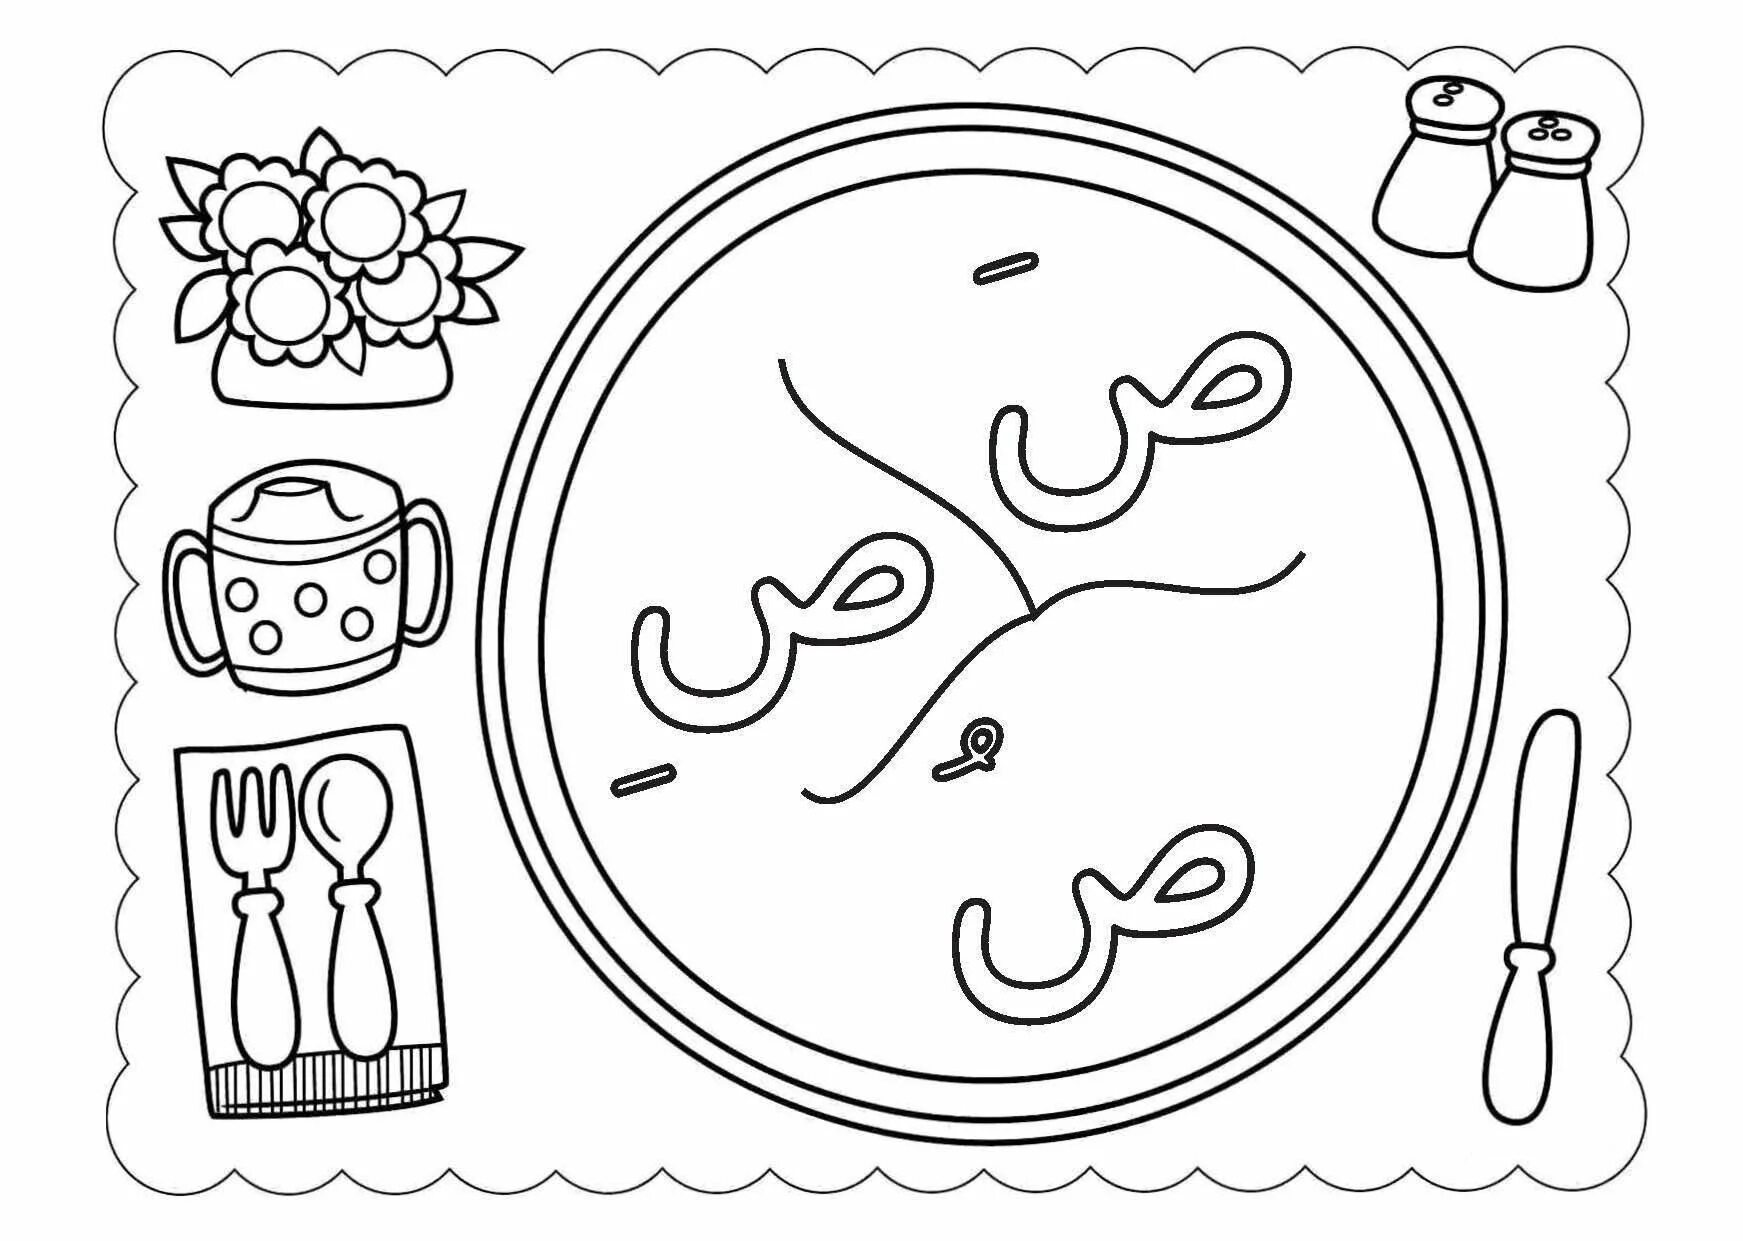 Arabic letters for kids #24